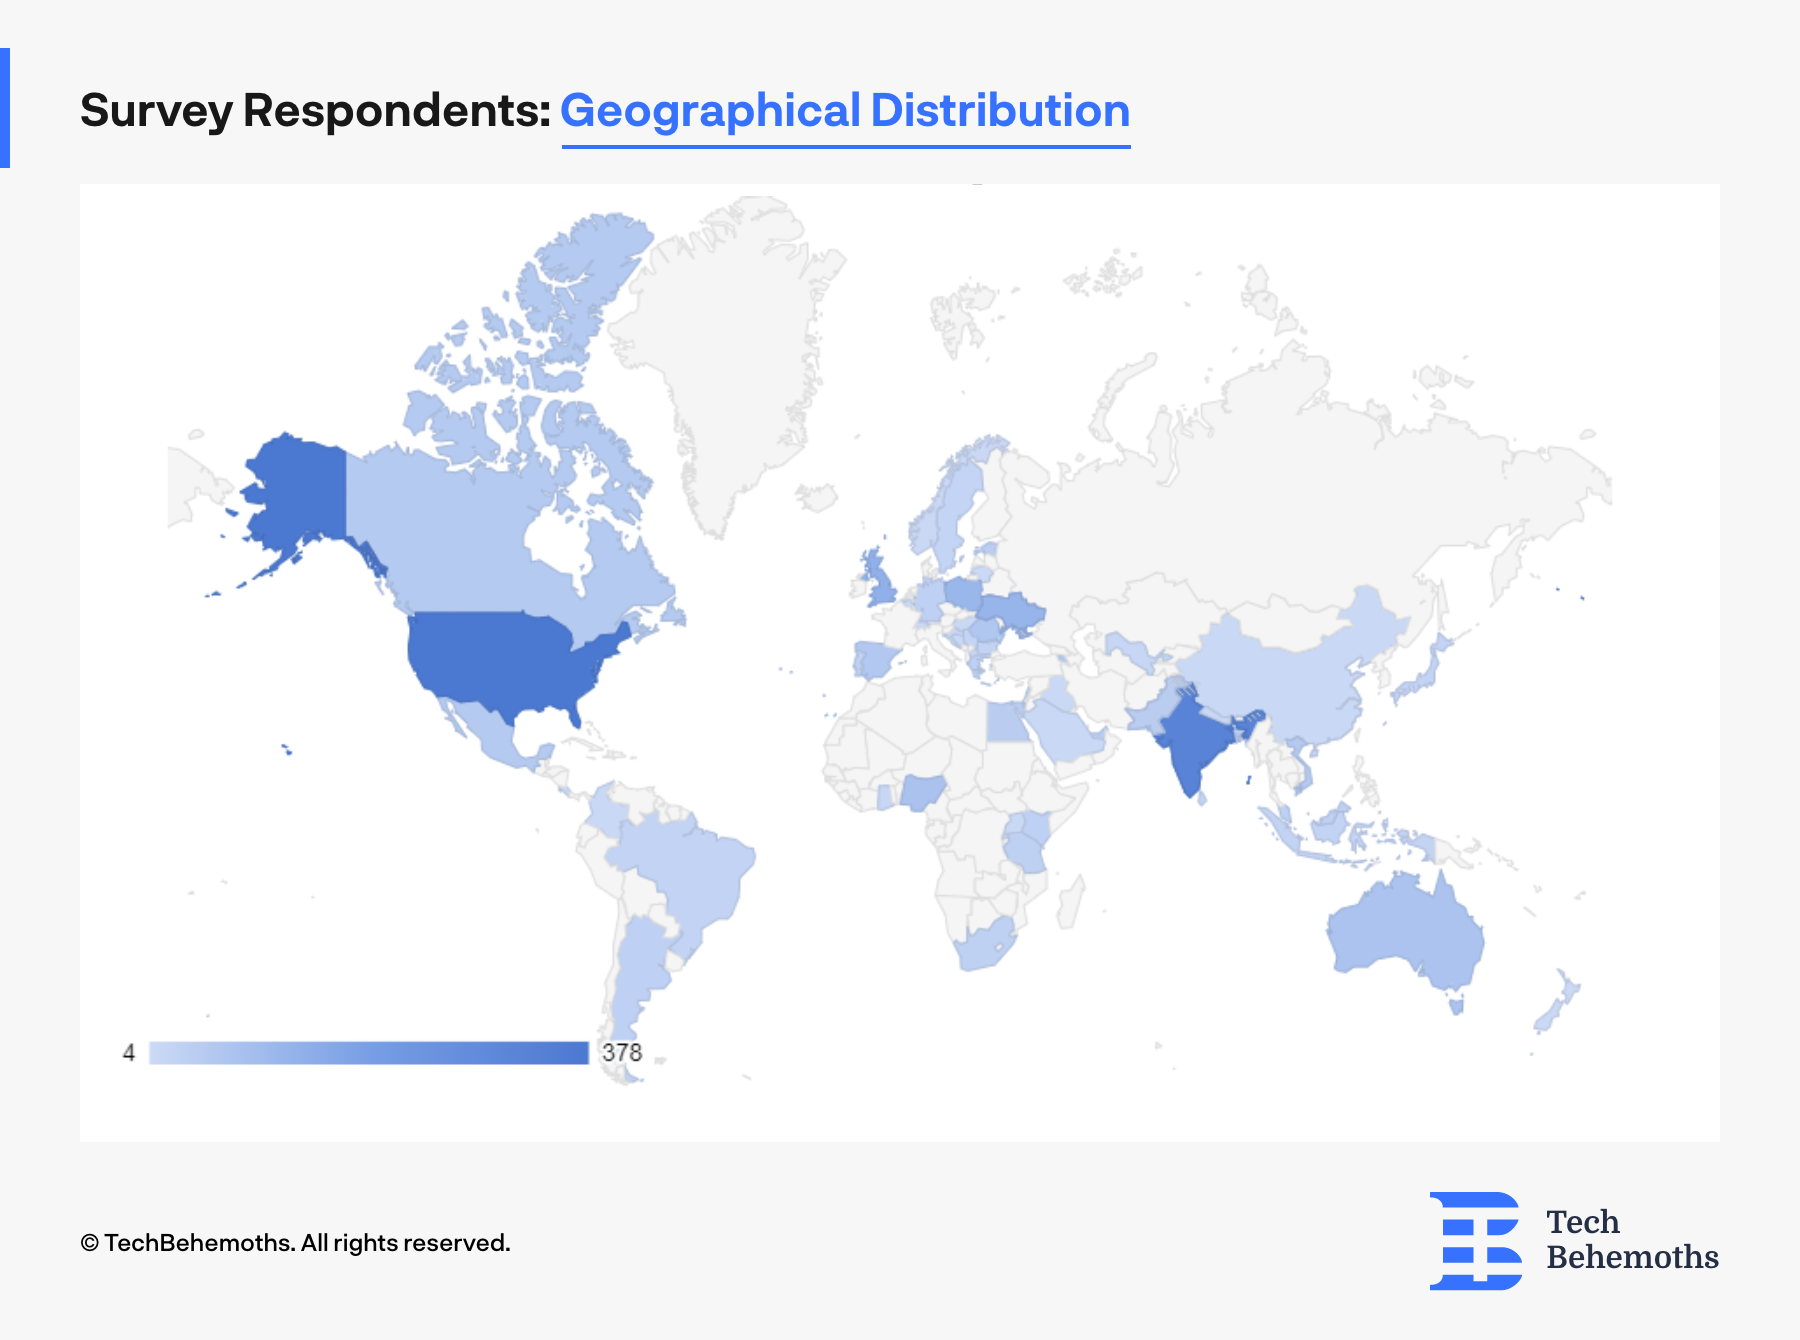 geographical distribution of TechBehemoths' survey respondents